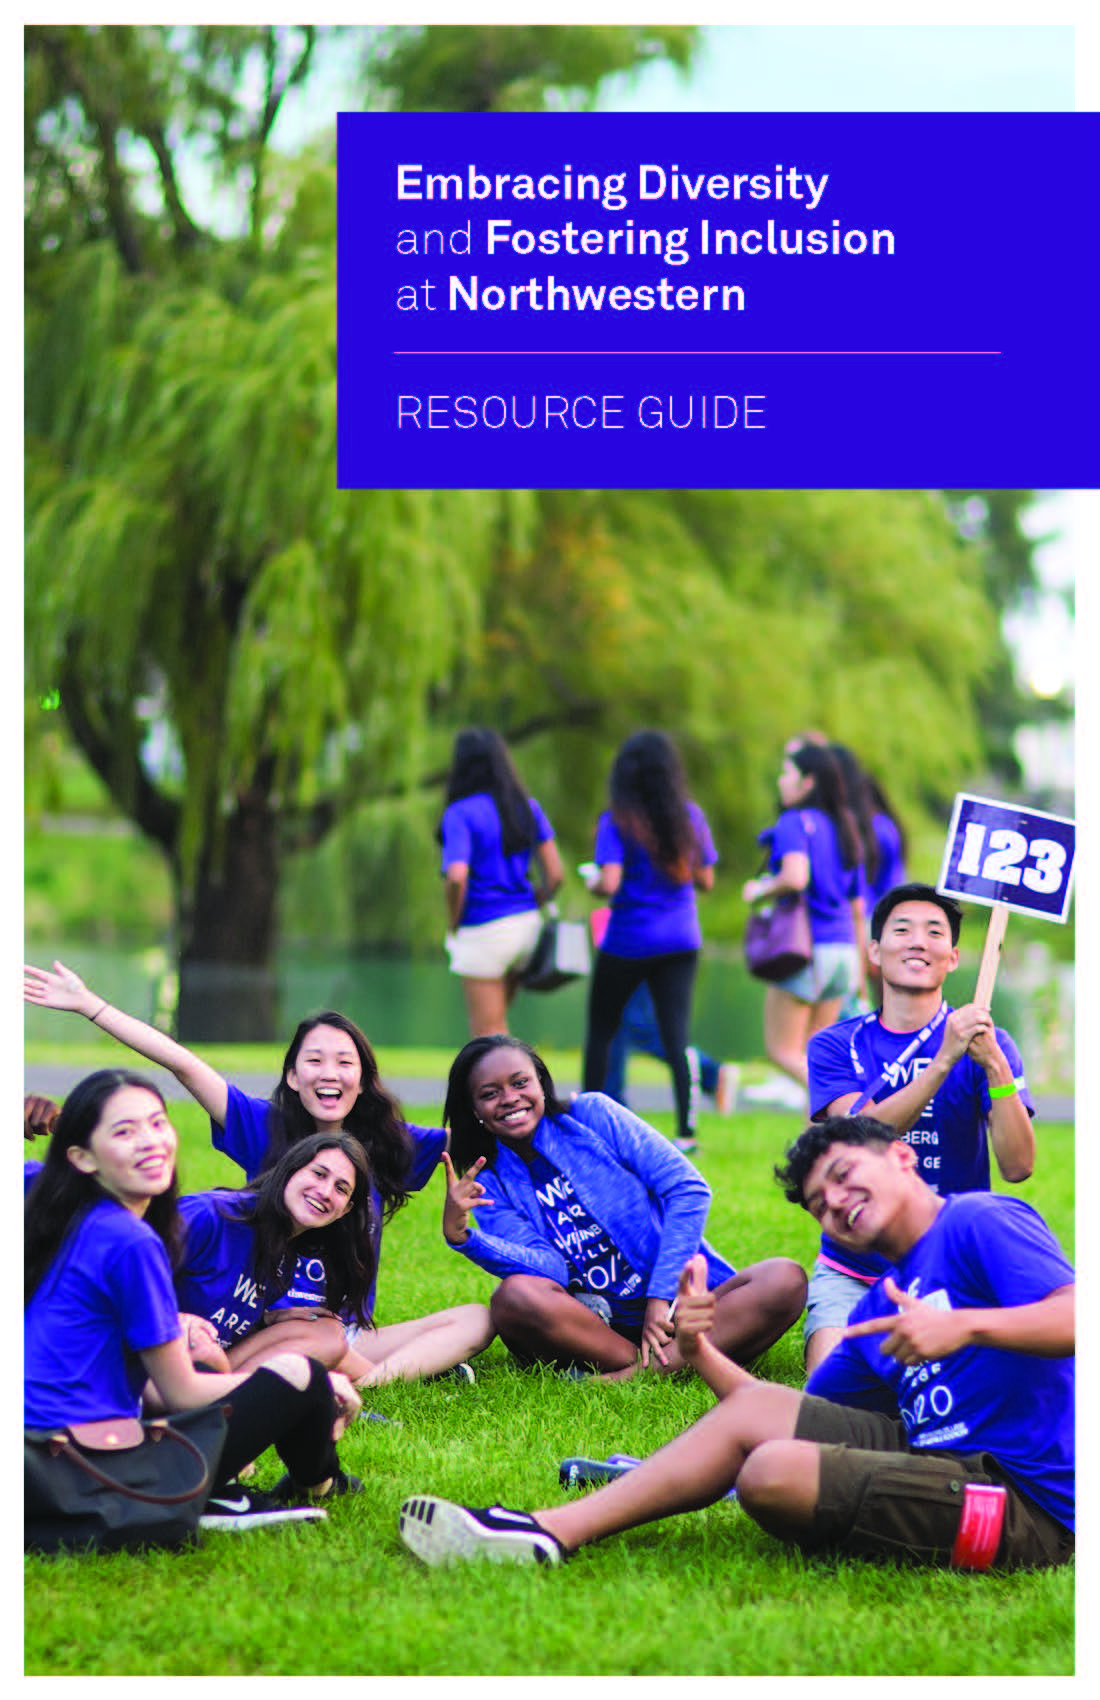 2019 resource guide cover.jpg